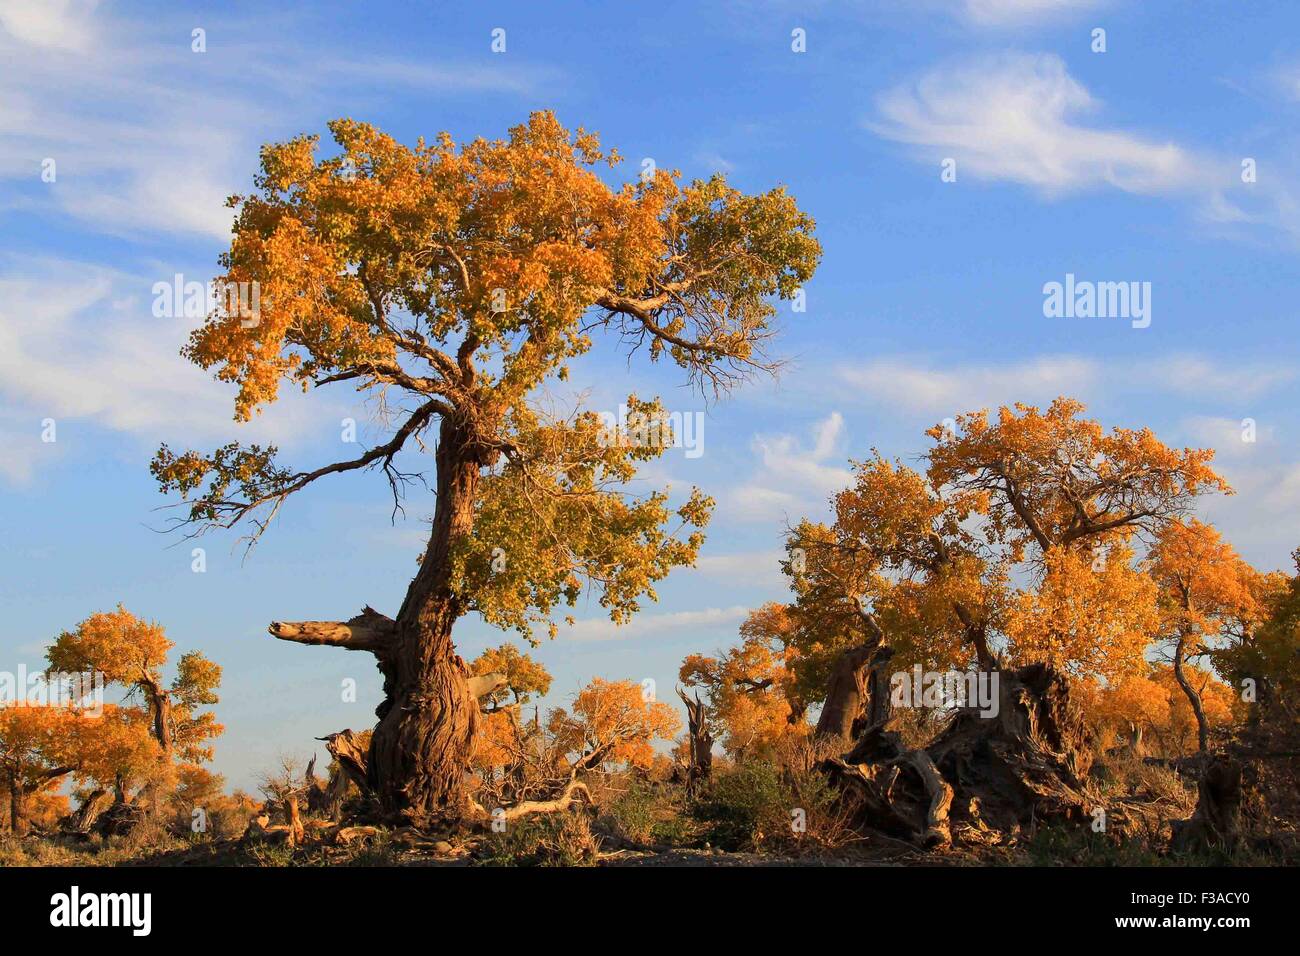 (151003) -- HAMI, Oct. 3, 2015 (Xinhua) -- Populus diversifolia trees are seen at Nom of Yiwu County of Hami, northwest China's Xinjiang Uygur Autonomous Region, Oct. 1, 2015. Autumn is the best season in China to enjoy the golden colour of the populus diversifolia trees.    (Xinhua/Cai Zengle) (zhs) Stock Photo